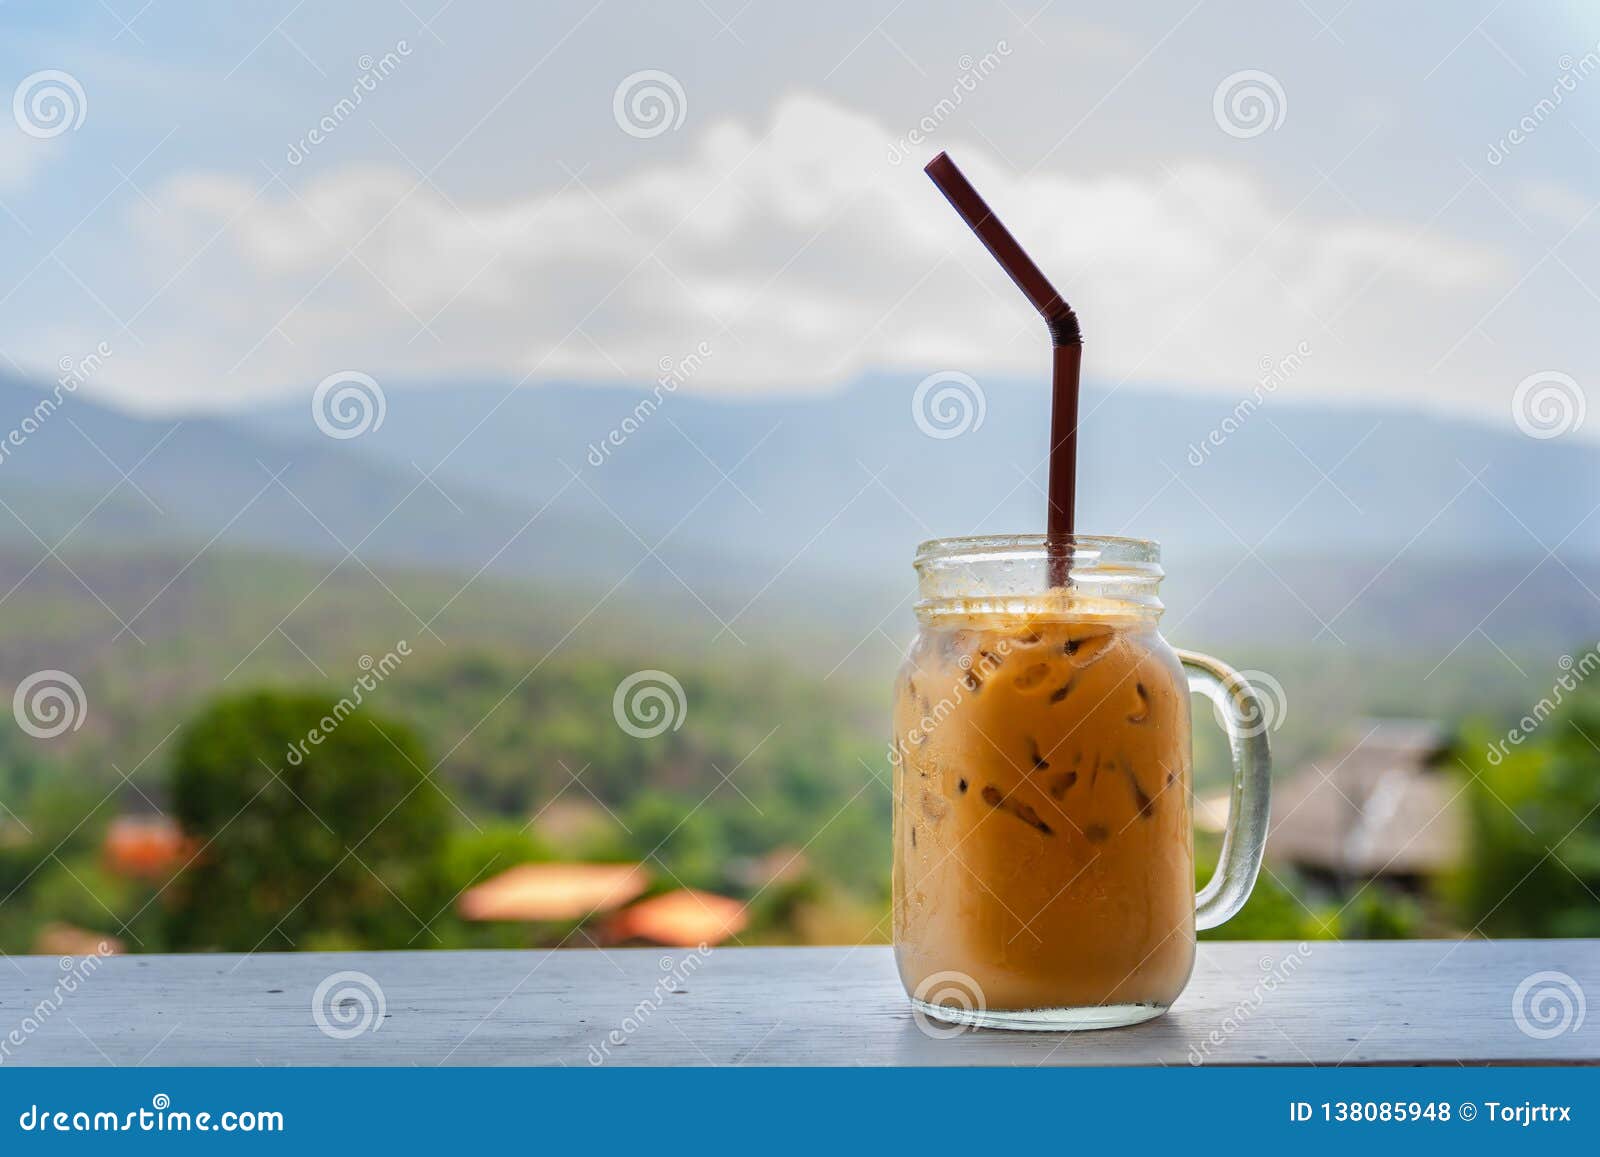 https://thumbs.dreamstime.com/z/fresh-cool-ice-coffee-cup-mountain-background-refreshment-hot-day-138085948.jpg